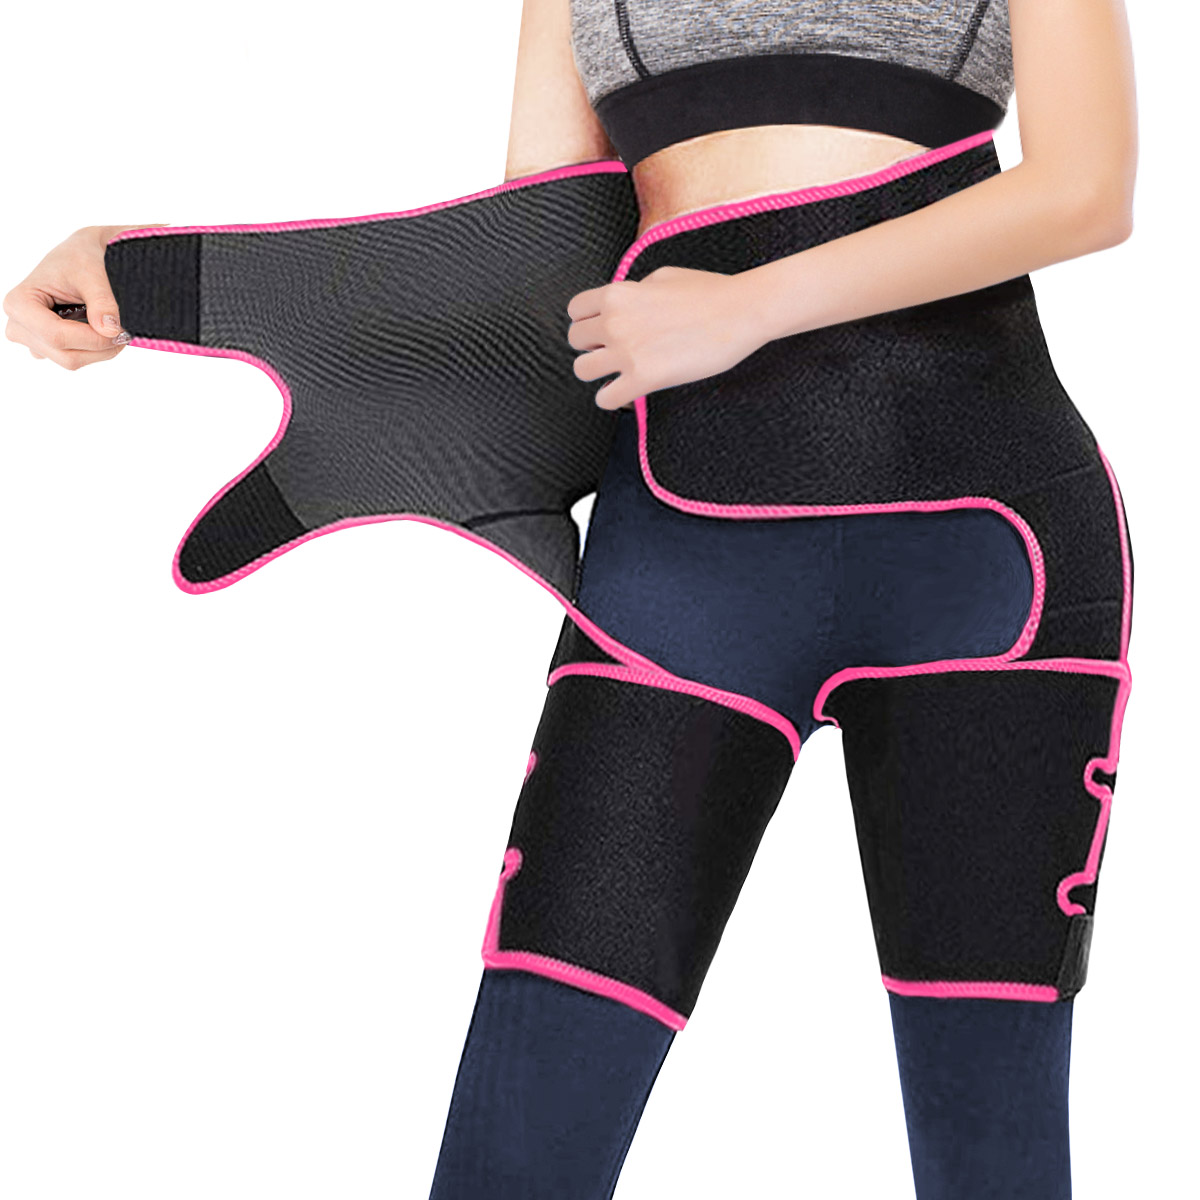 3-in-1-Waist-Thigh-Trimmer-Hip-Enhancer-Waist-Trainer-Back-Proection-Gear-for-Shaping-Body-Slimbing--1741996-3